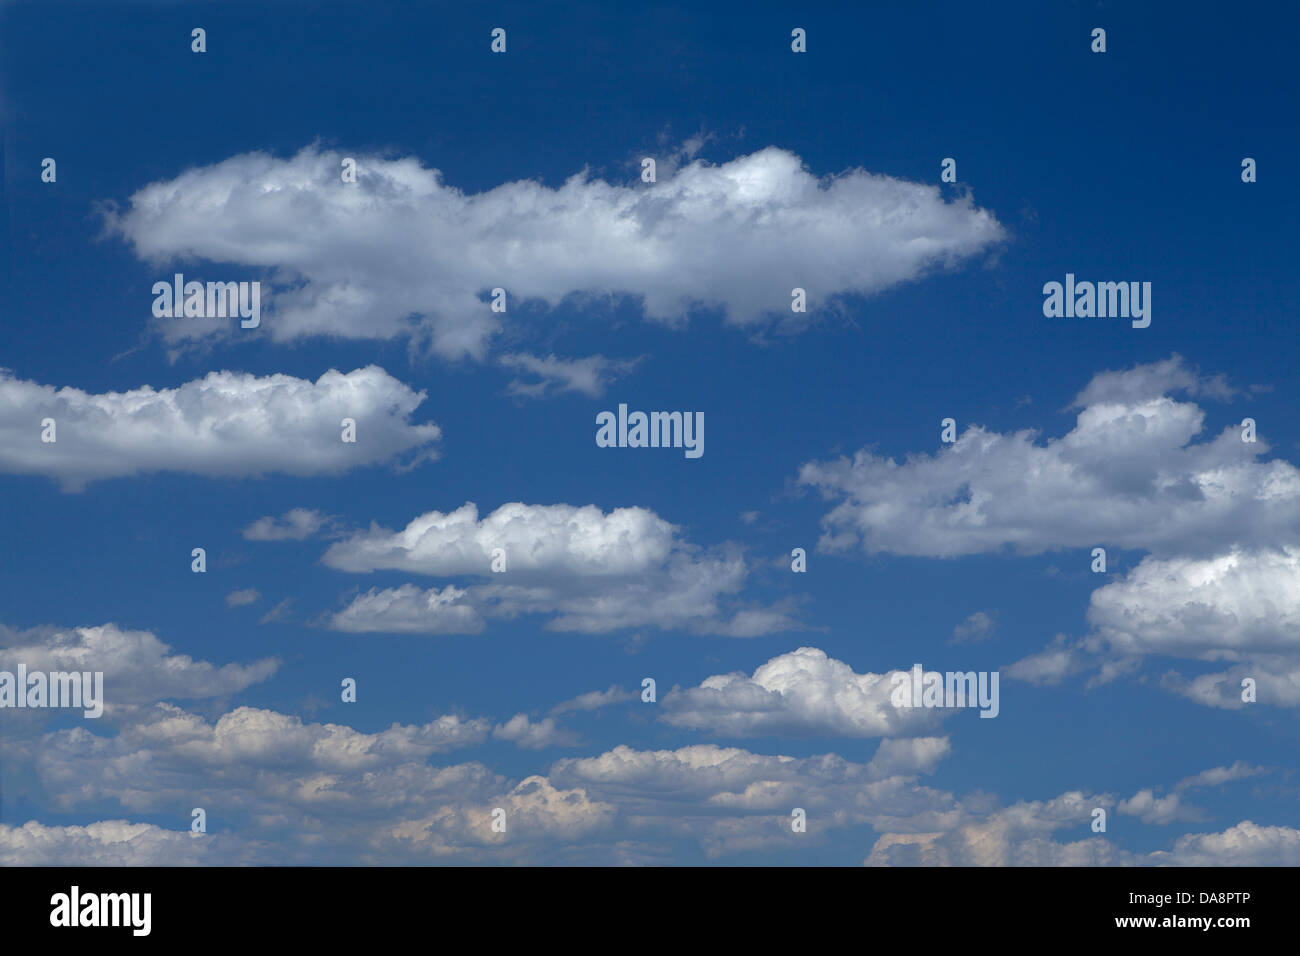 Sky, clouds, sunshine, fair weather, Cosmos, nature, freedom, liberty, white, blue, width, broadness, Stock Photo